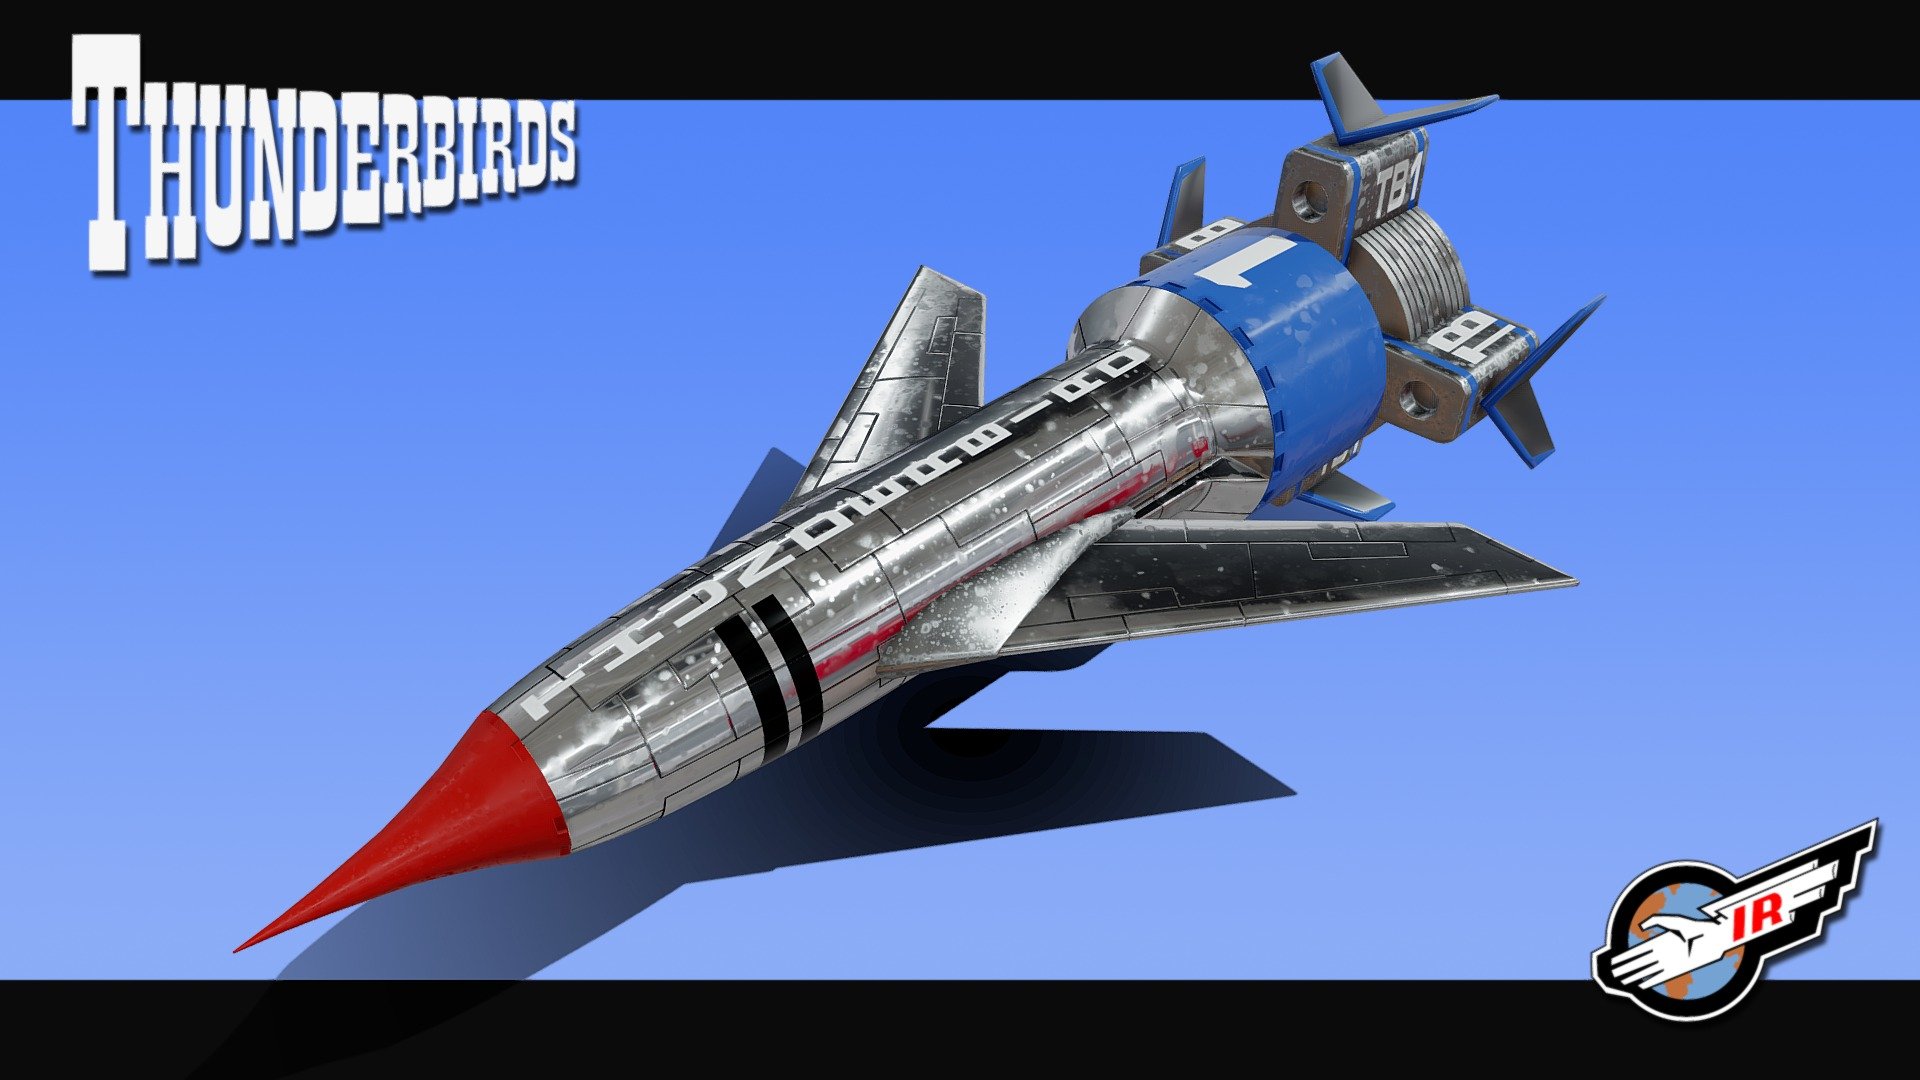 Thunderbird I is a imaginary sleek, variable geometry (swing wing) hypersonic rocket plane used for fast response, rescue zone reconnaissance, and as a mobile control base as shown in the 60's puppet program &ldquo;thunderbirds are go !